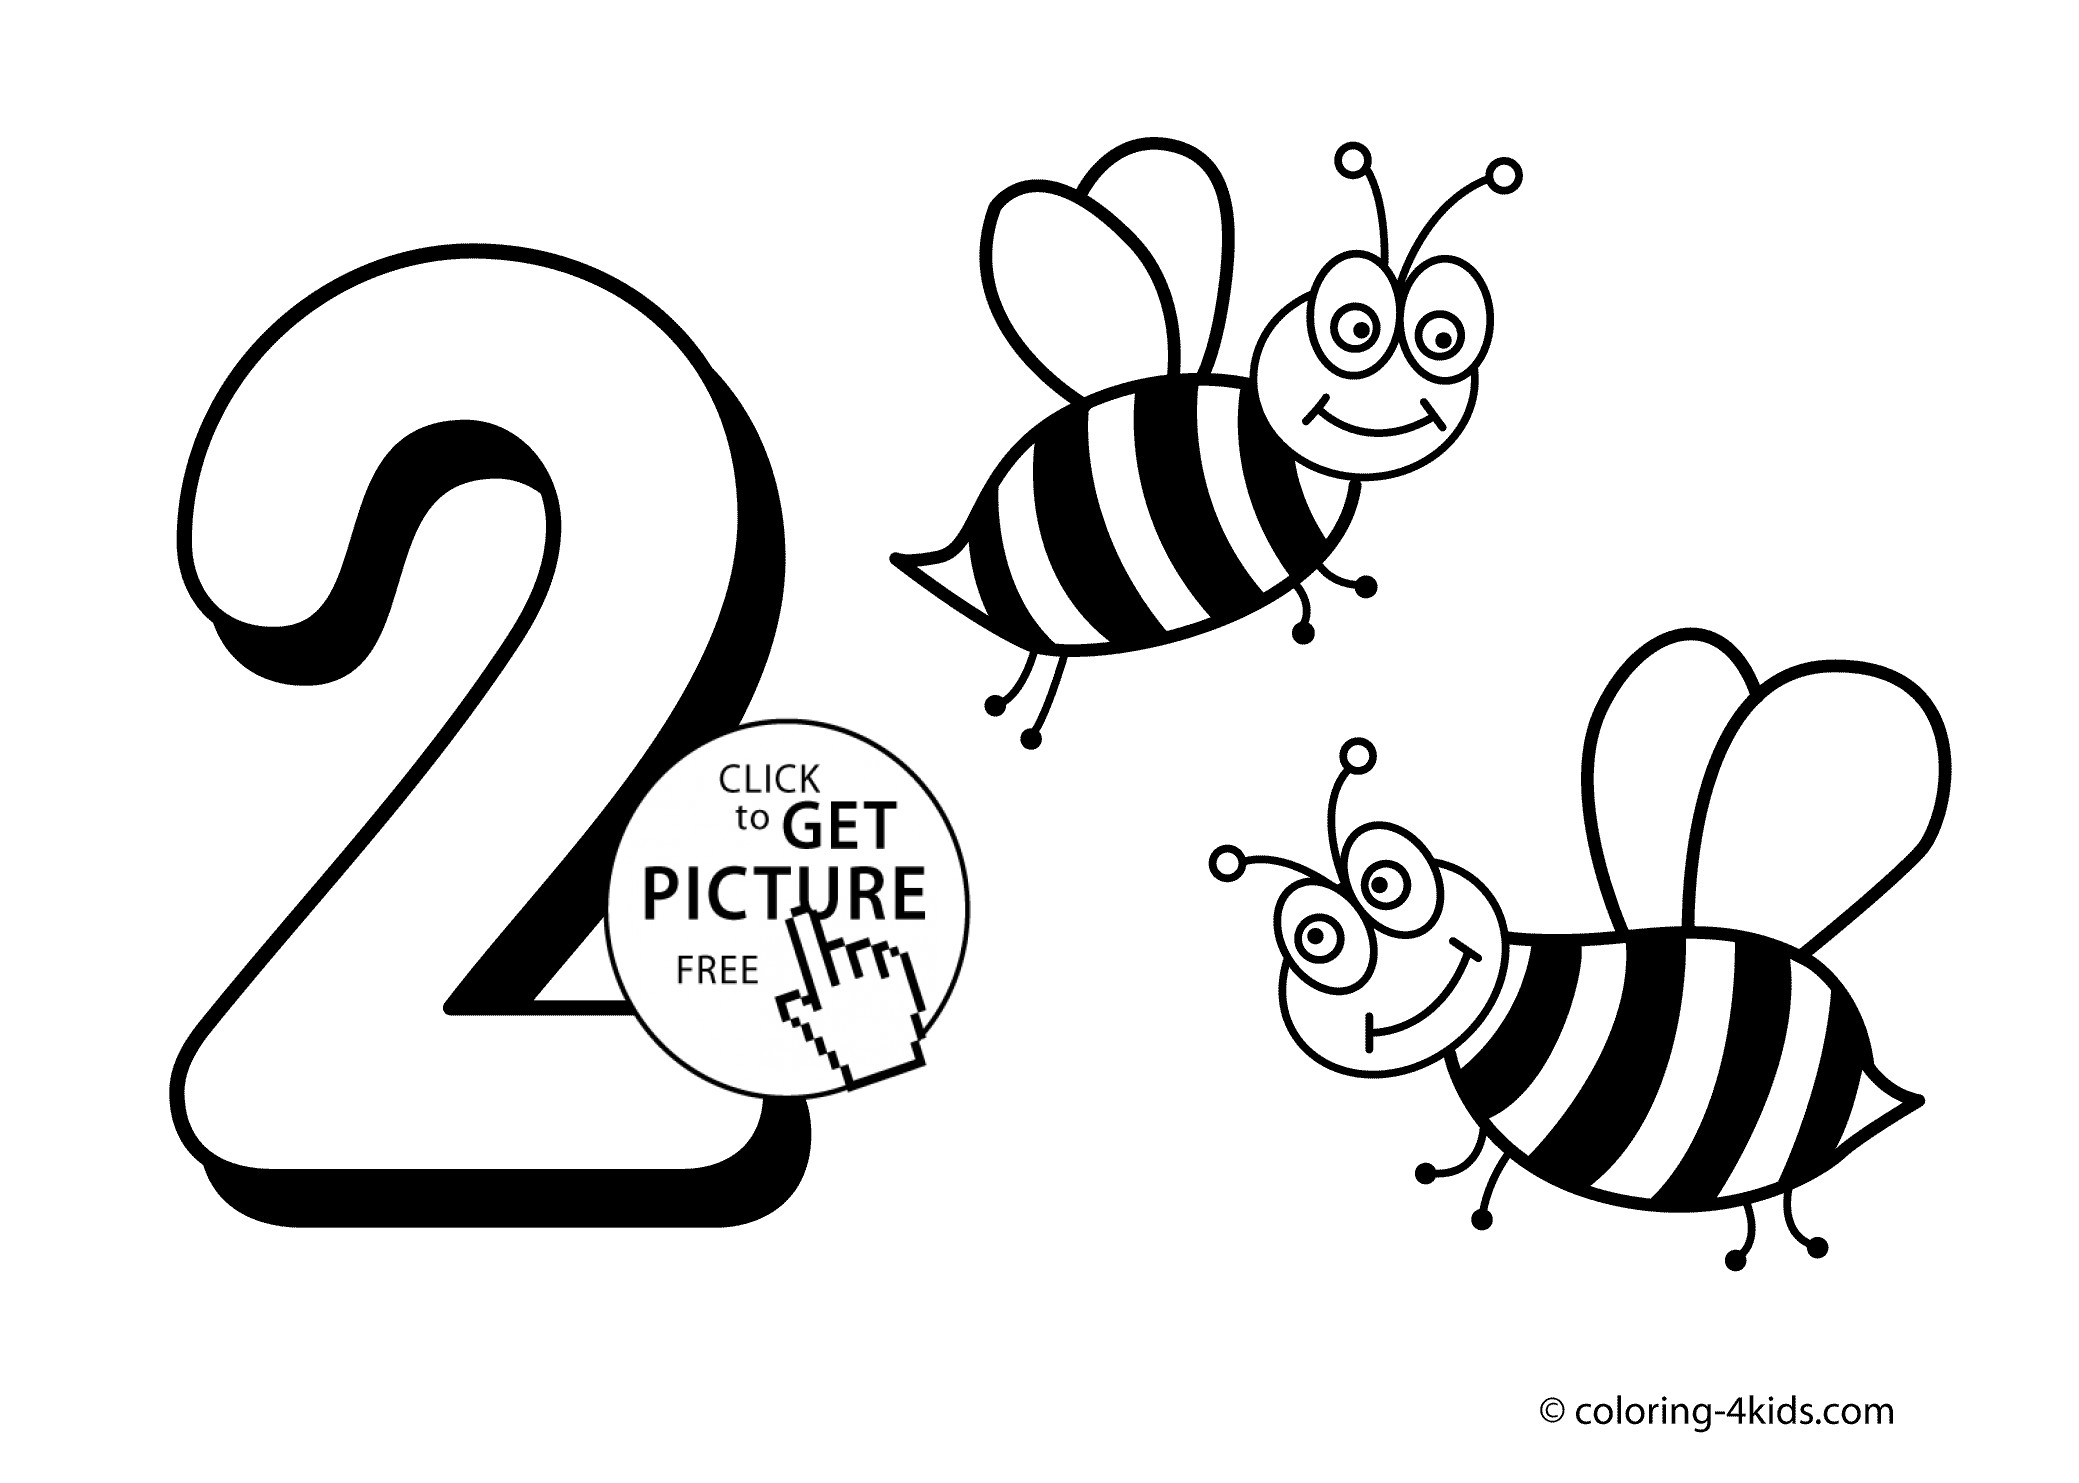 Number Coloring Pages For Toddlers
 2 numbers coloring pages for kids printable free digits